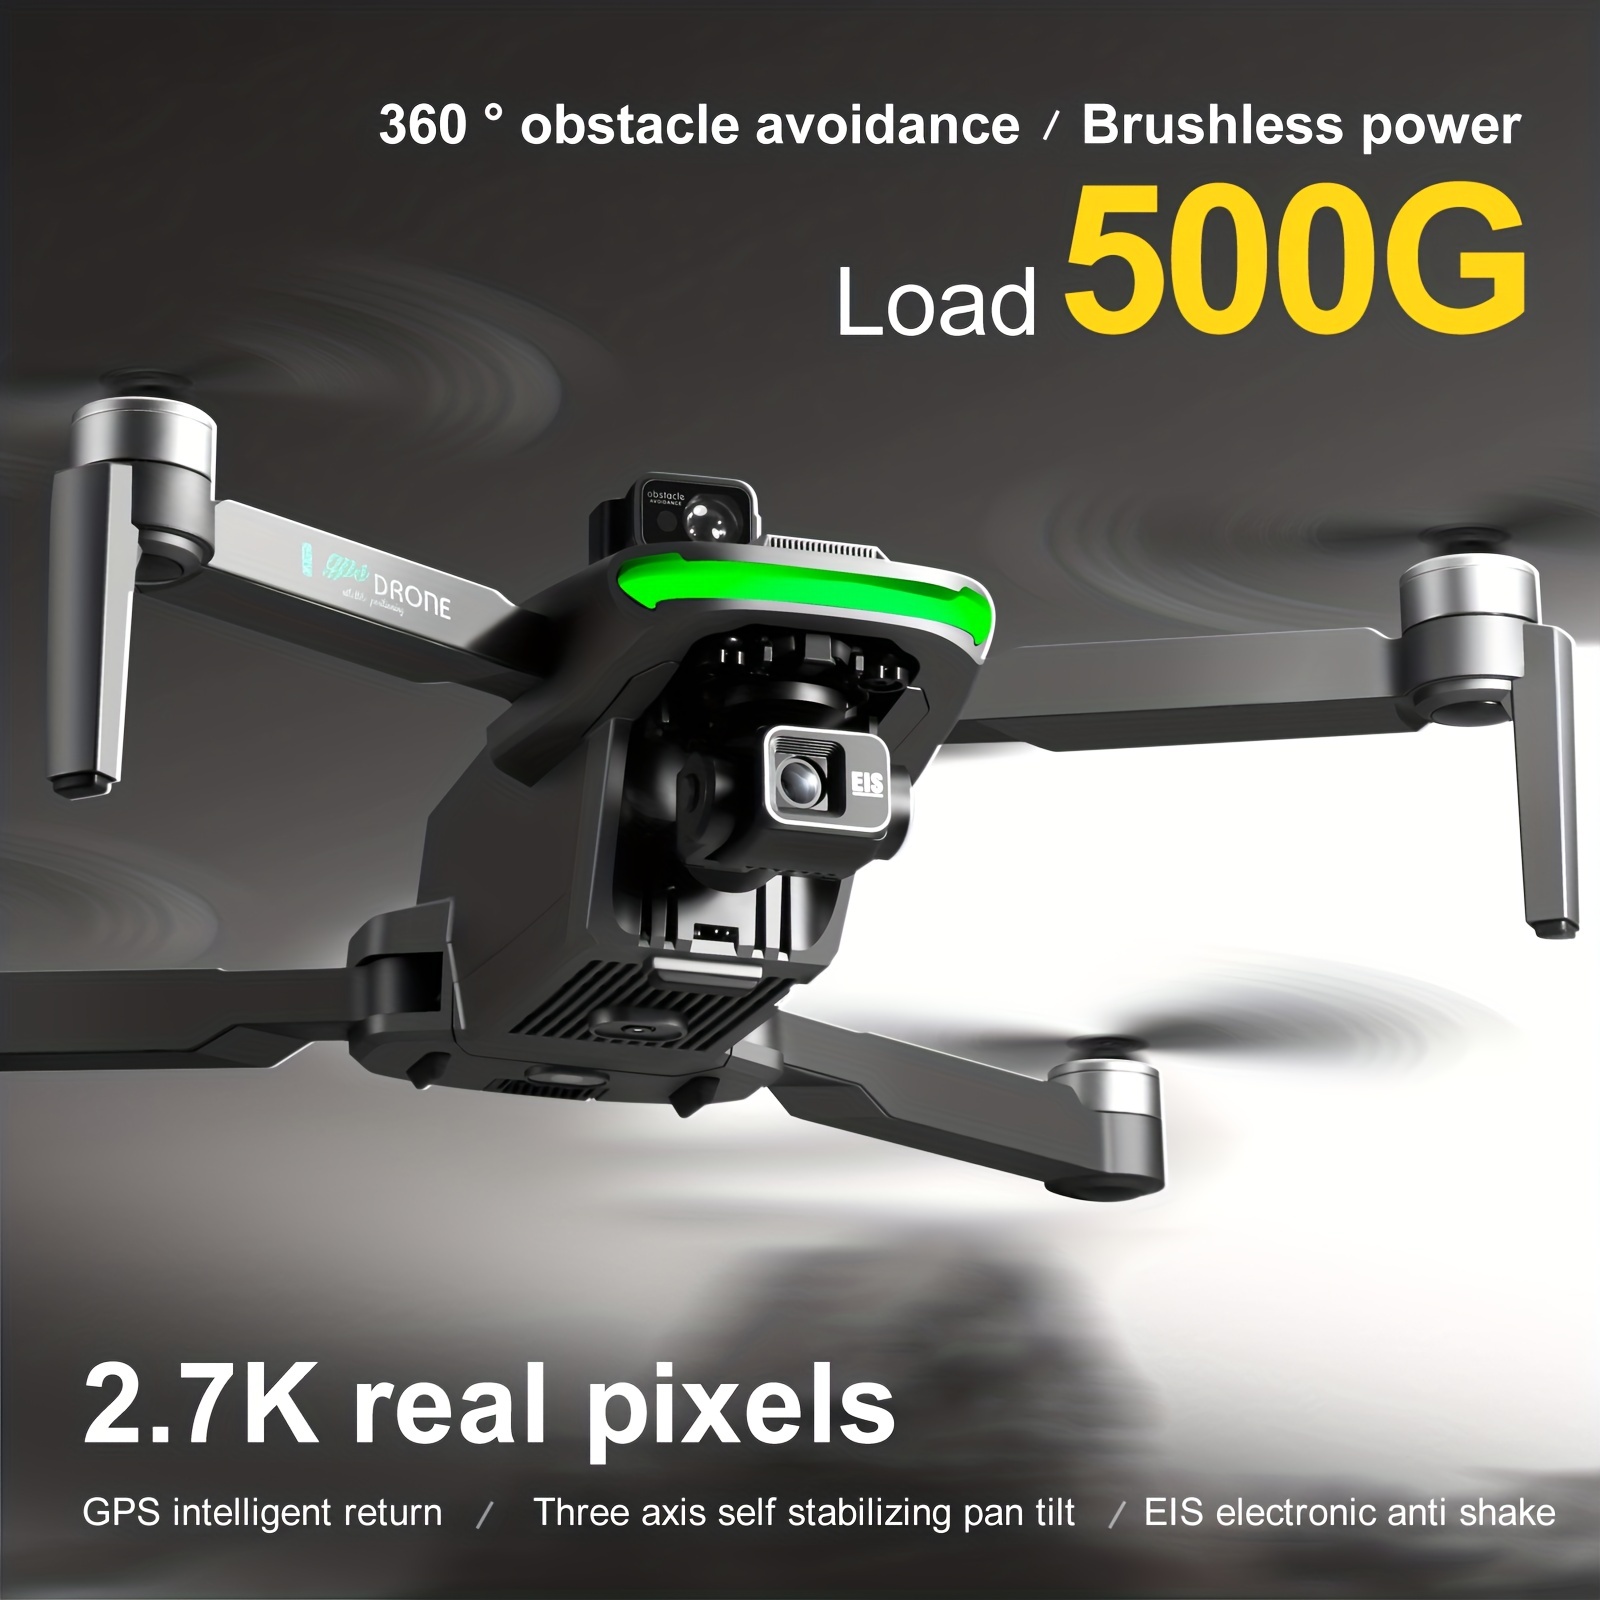  NEW Drone Pro Obstacle Avoidance GPS Drone with 4K EIS Camera  for Adults Beginner Professional Foldable FPV RC Quadcopter with Brushless  Motor, Auto Return Home, Selfie, Follow Me, Waypoints Fly 